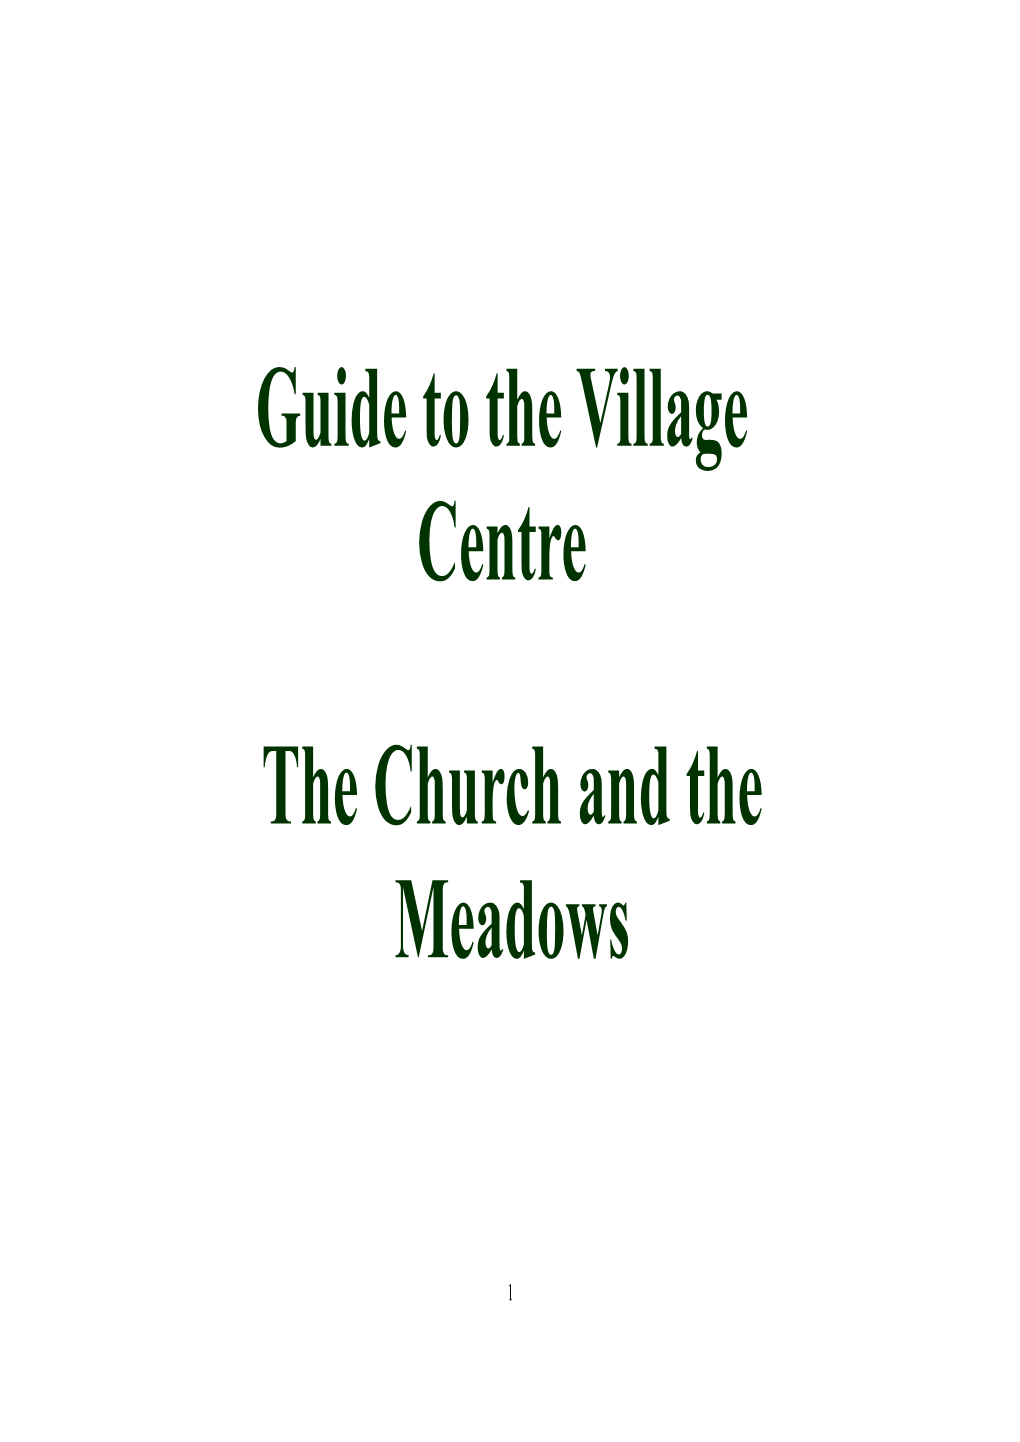 Guide to Railway and Meadows